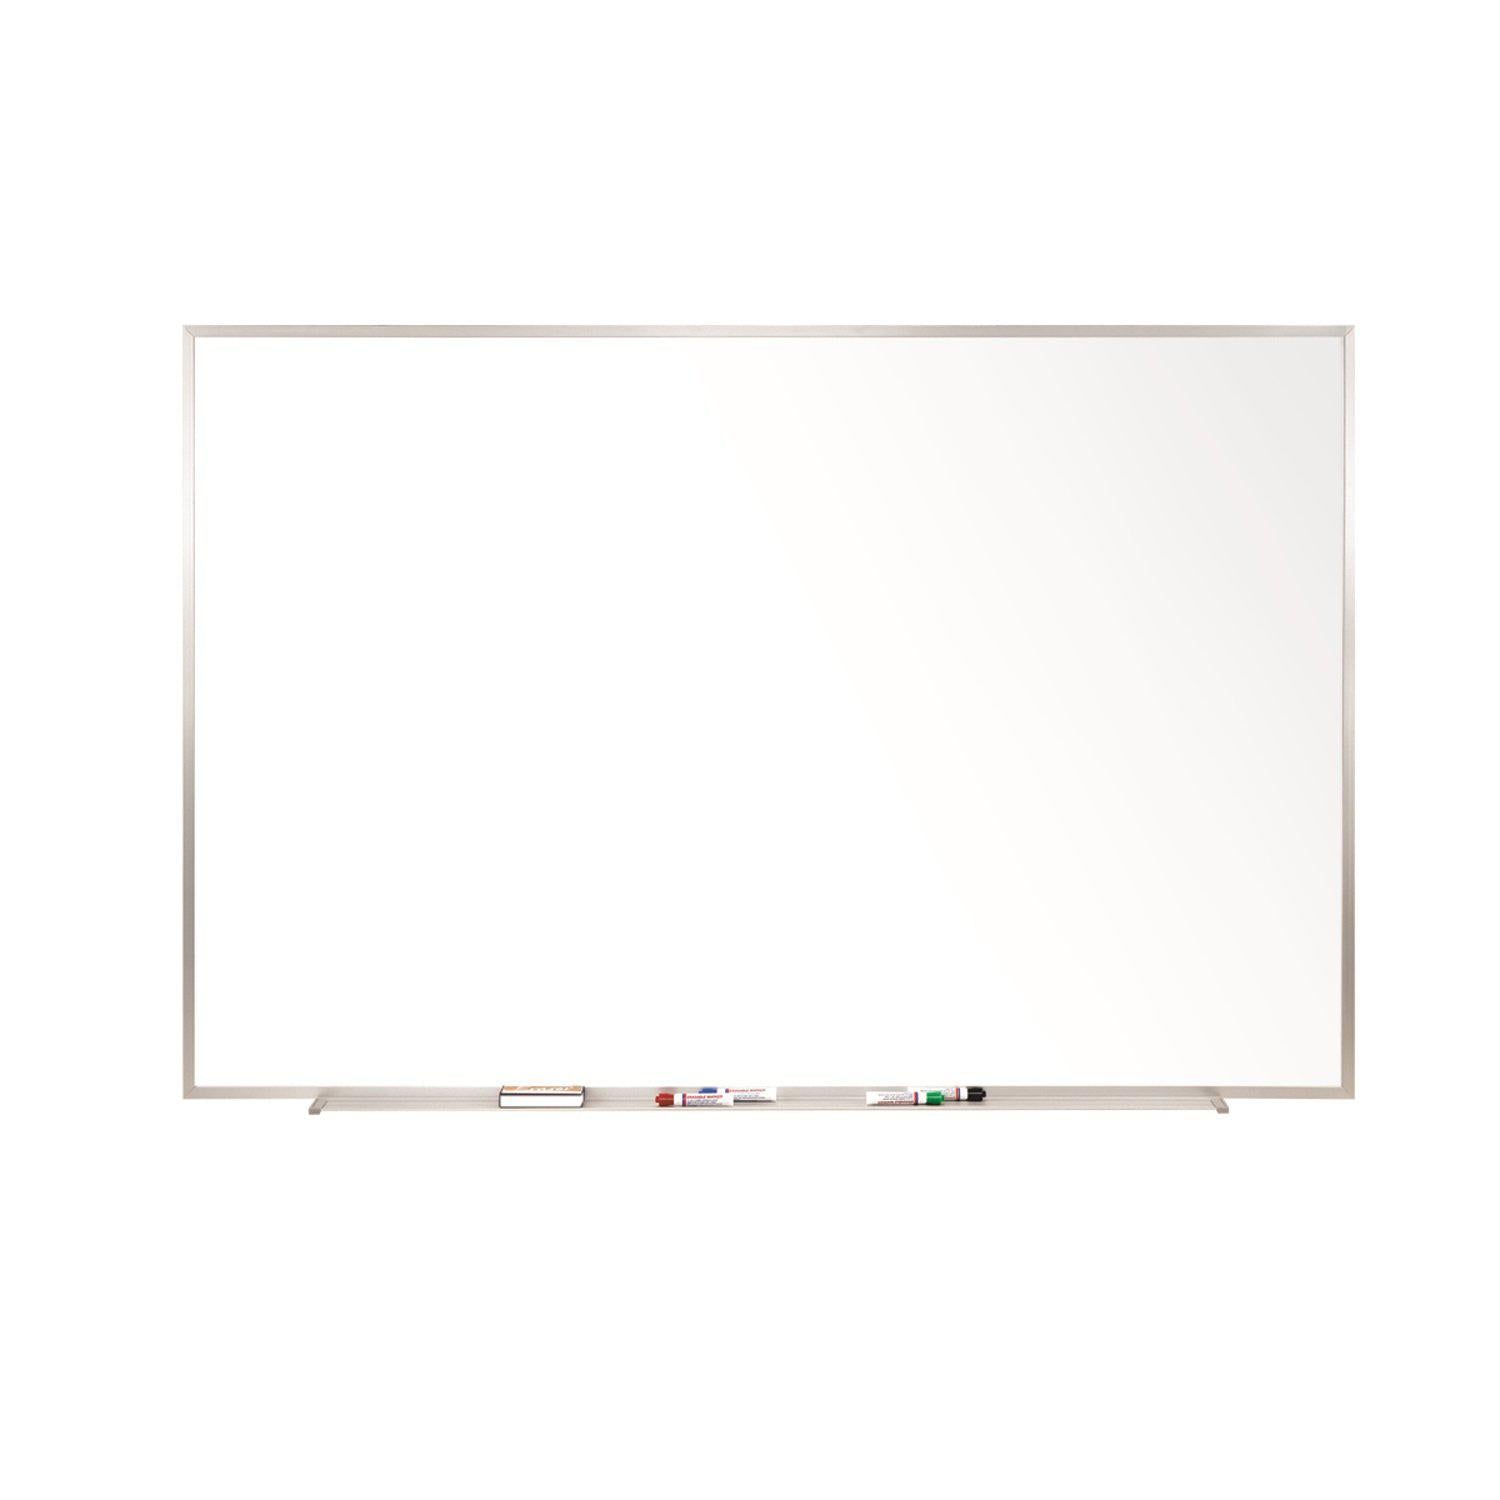 Double-Sided Mobile Magnetic Whiteboard - 46 x 34 in. Nexus Easel